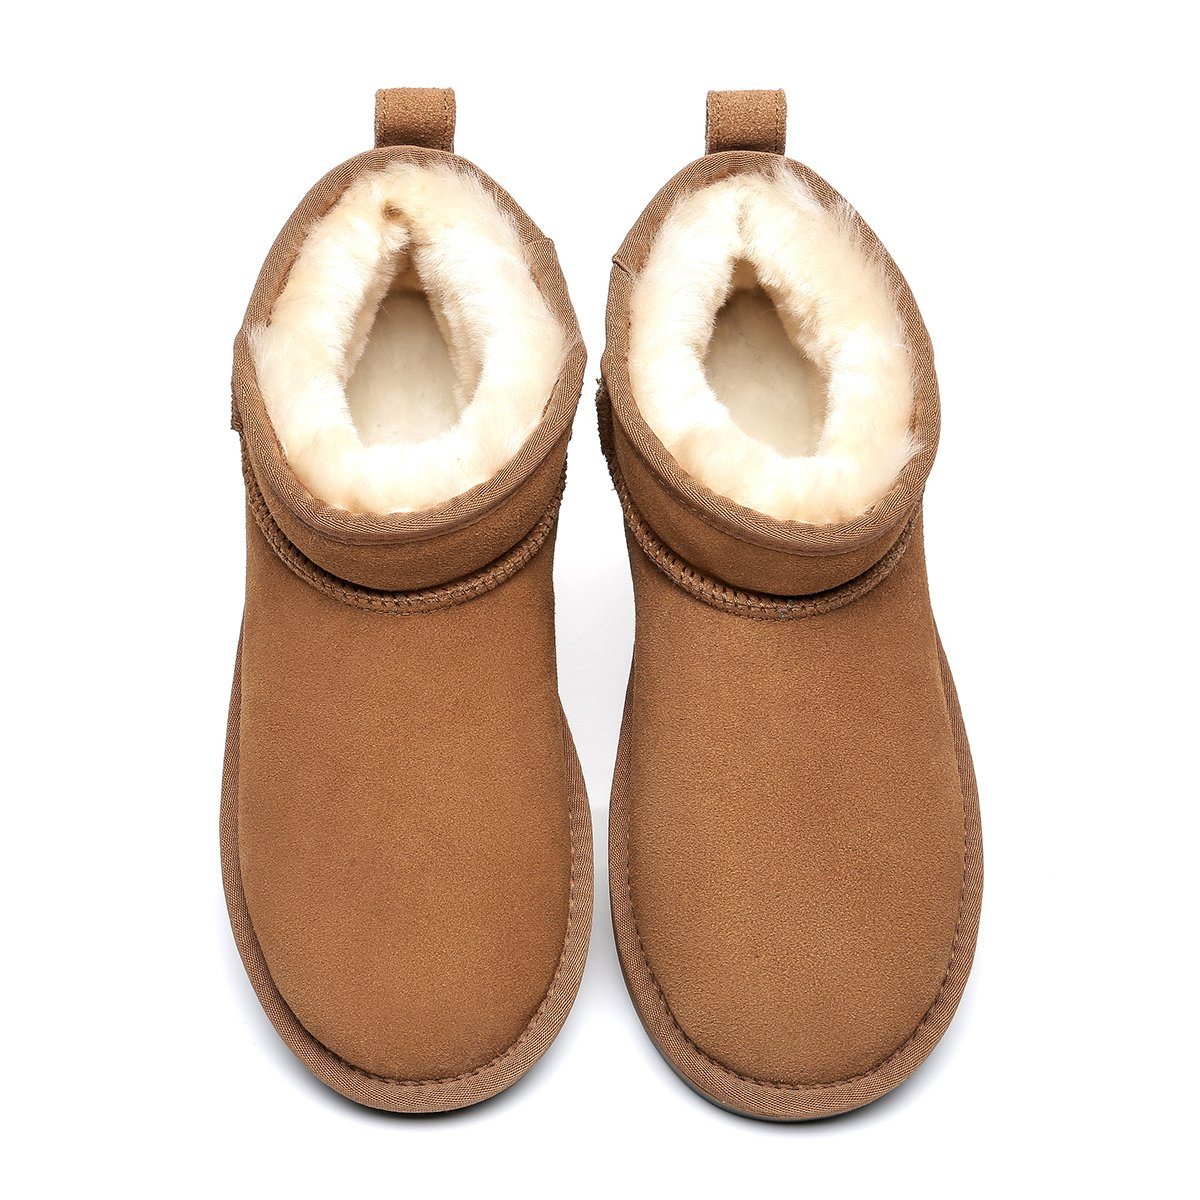 UGG Mini Ankle Boots